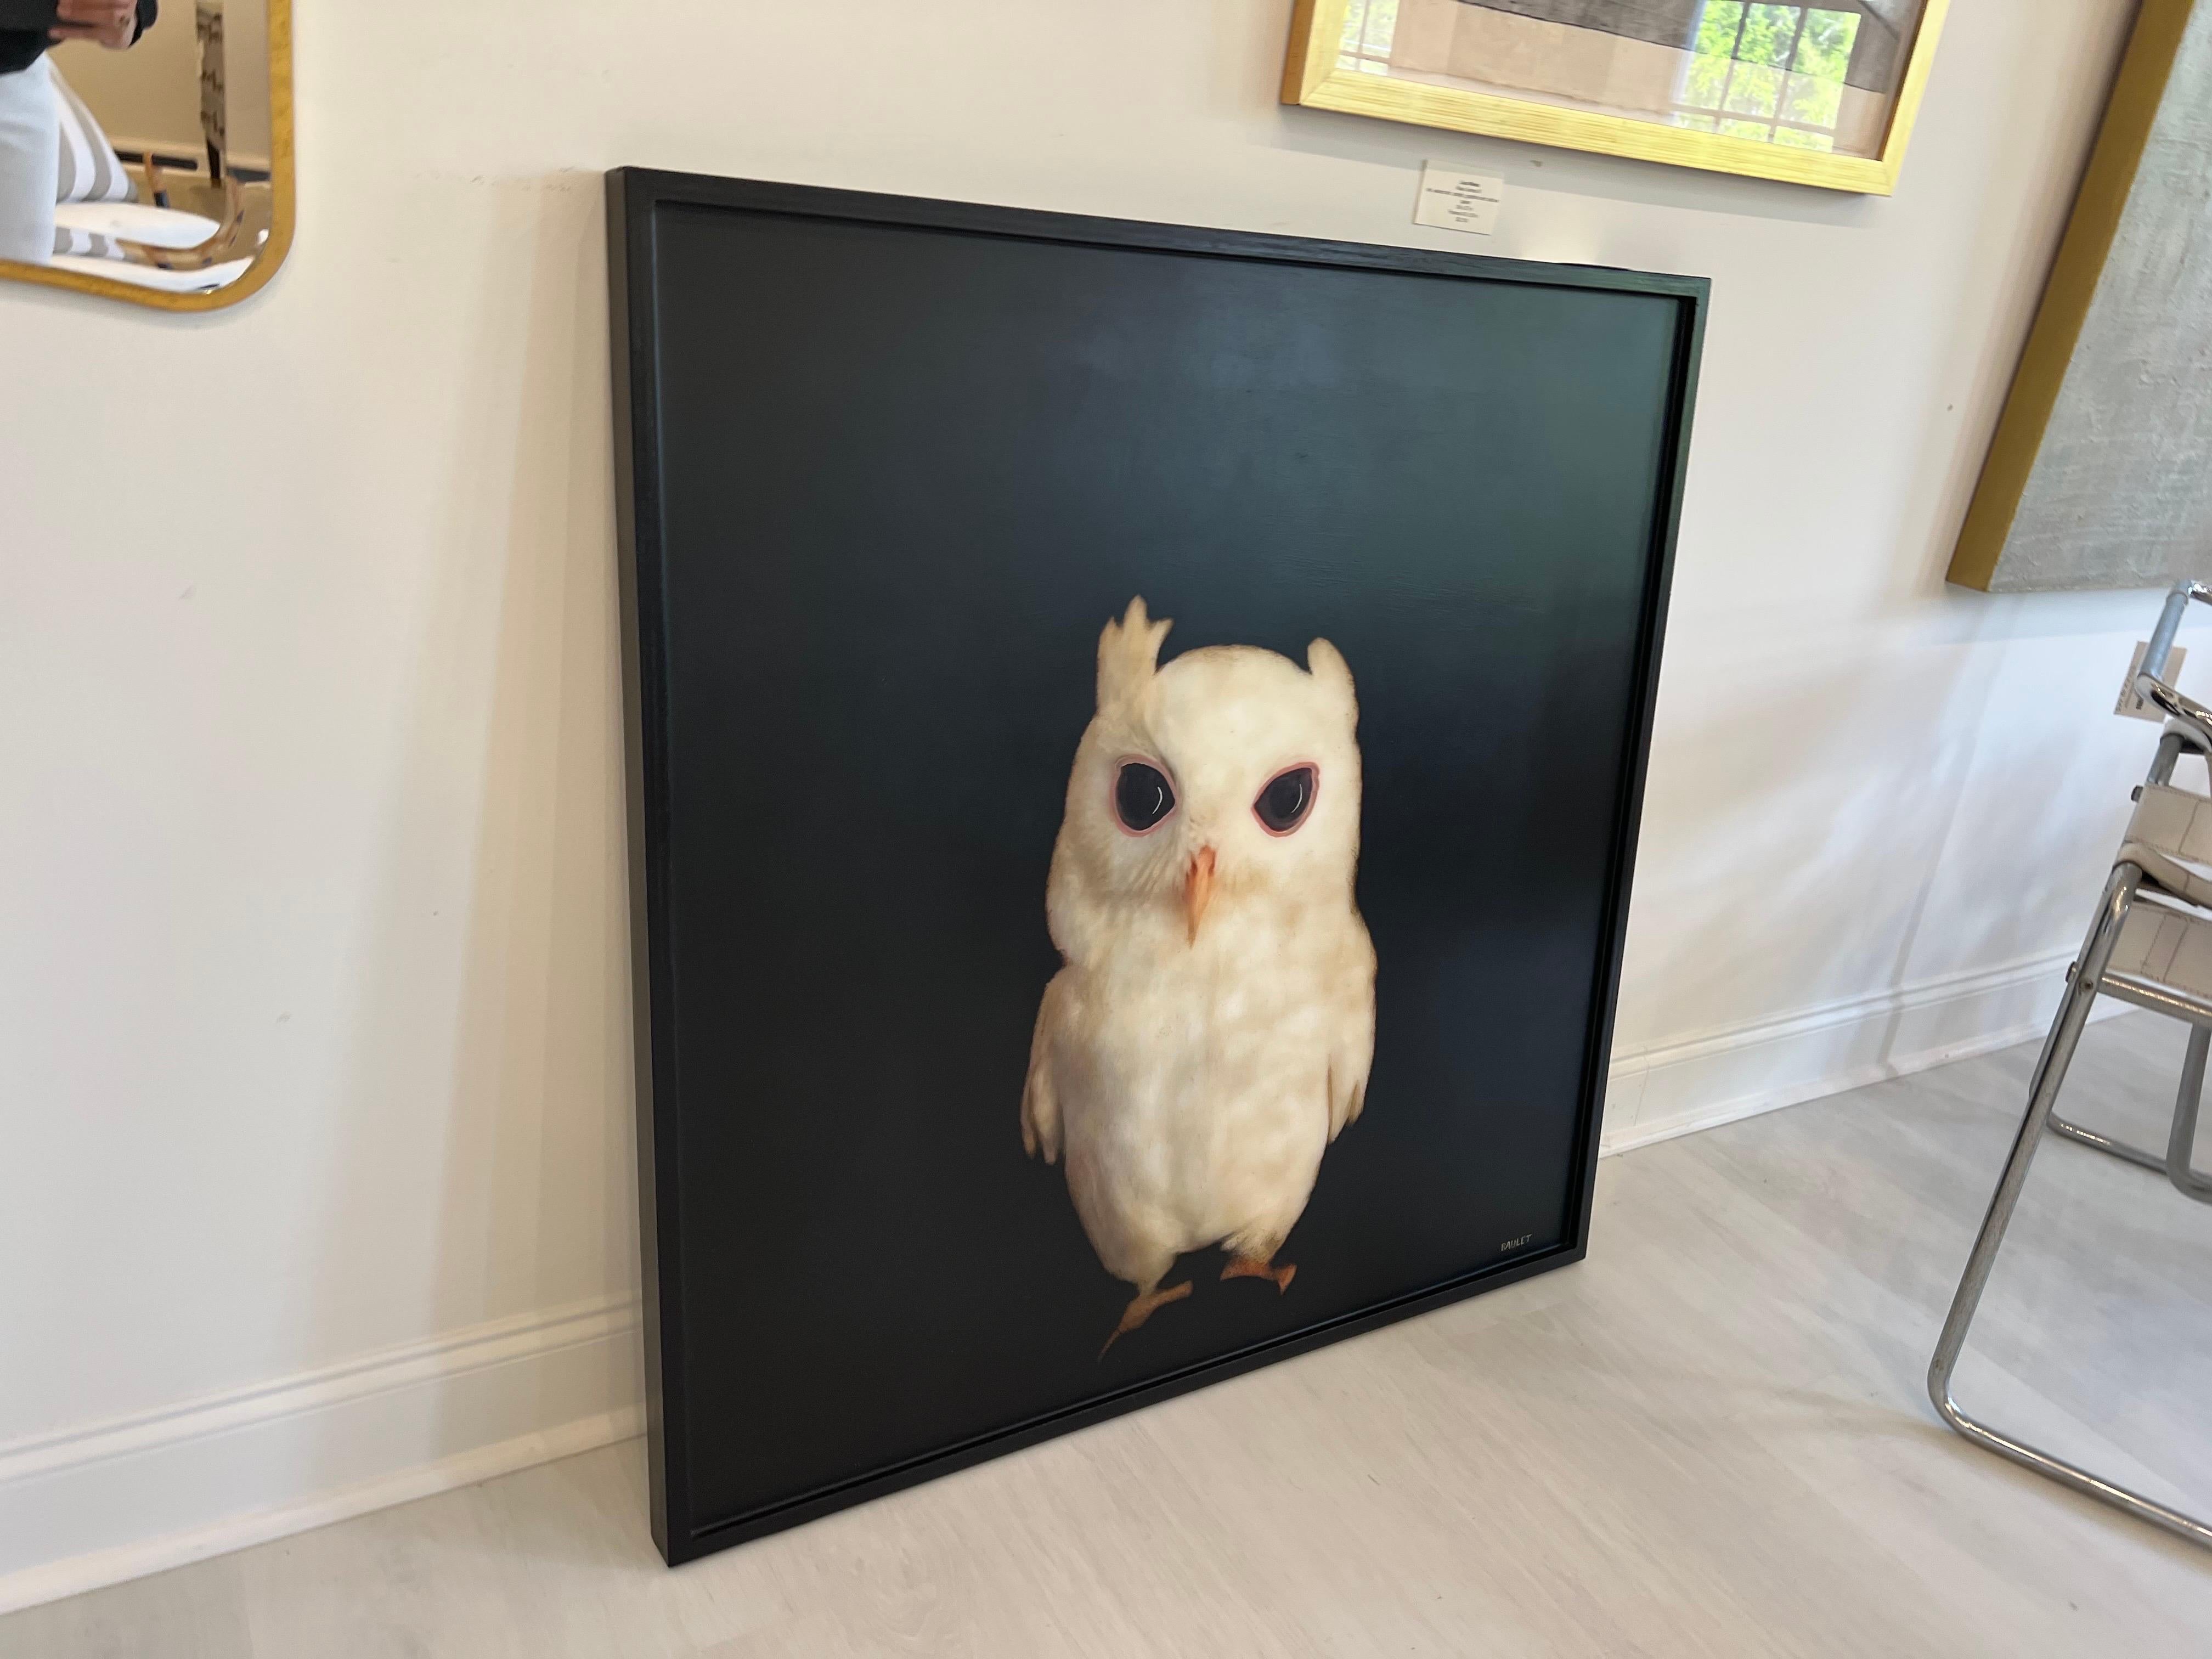 Hootie by Dawne Raulet Large Contemporary Mixed Media Owl Painting on Panel 5